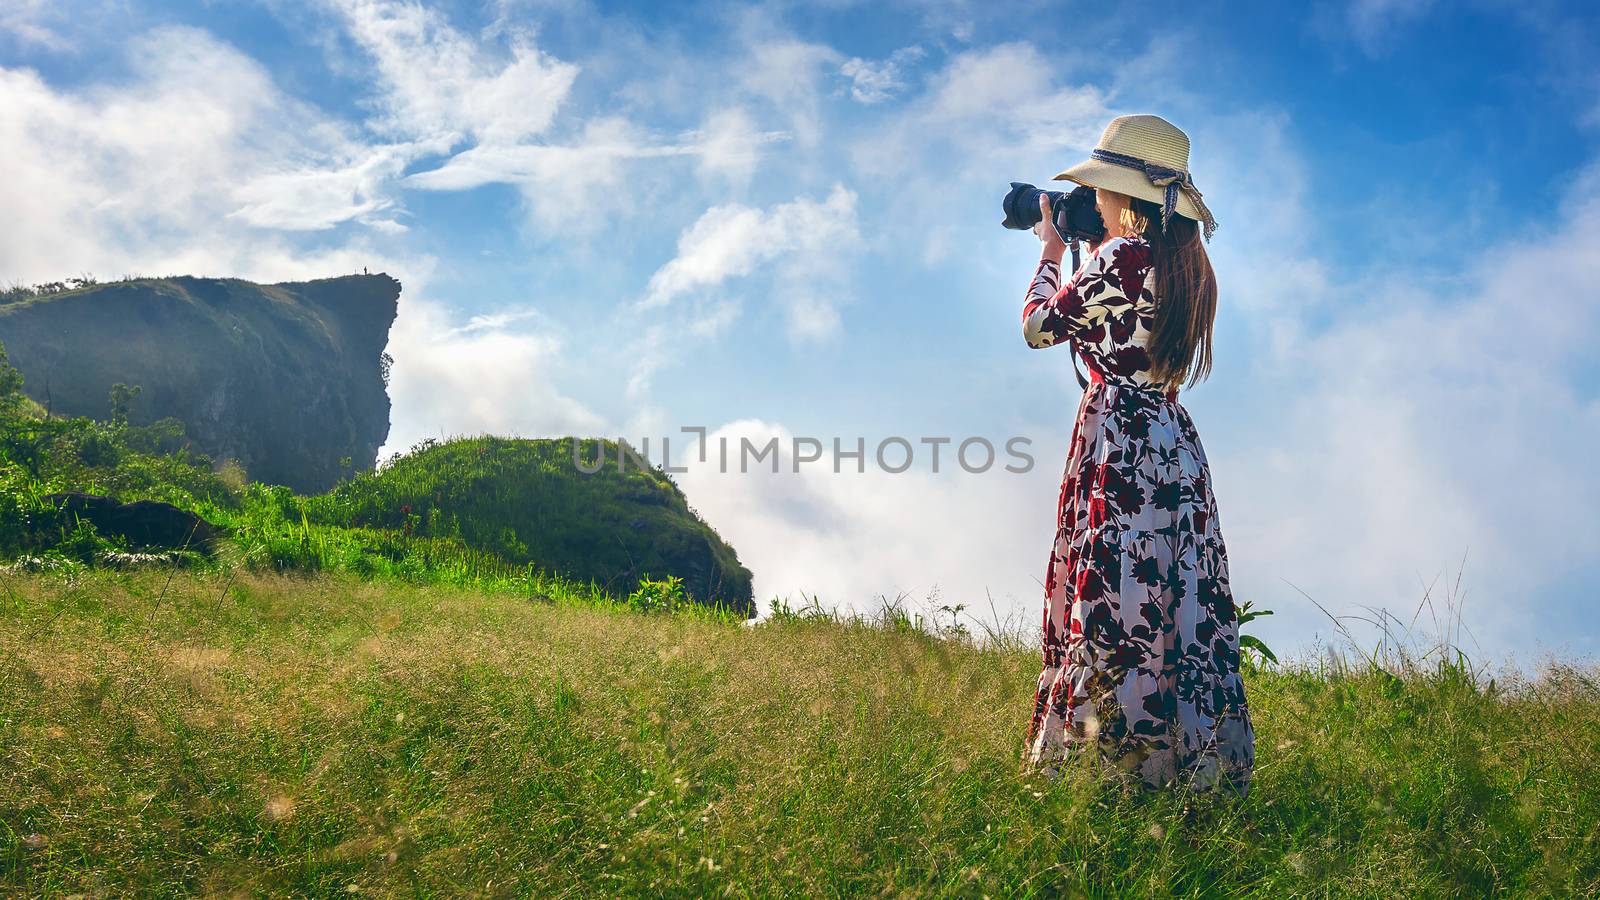 Woman standing on meadow and holding camera take photo at Phu Chi Fa mountains in Chiangrai, Thailand. Travel concept. Vintage tone.